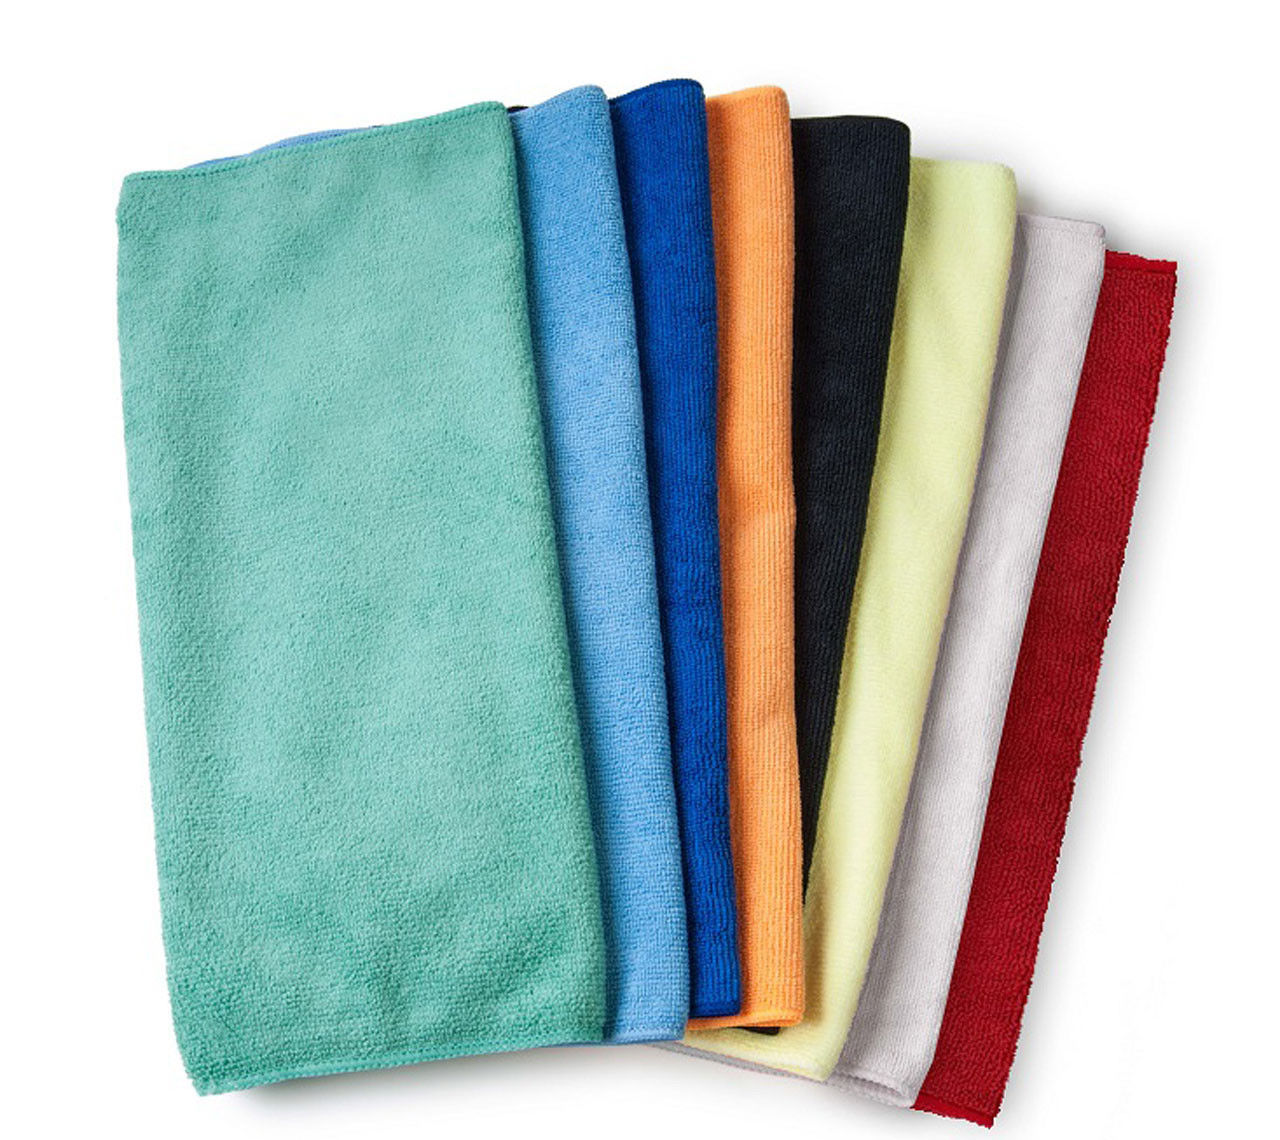 Microfiber Golf Towel, in Bulk - 300 gsm,16 x 16 Questions & Answers